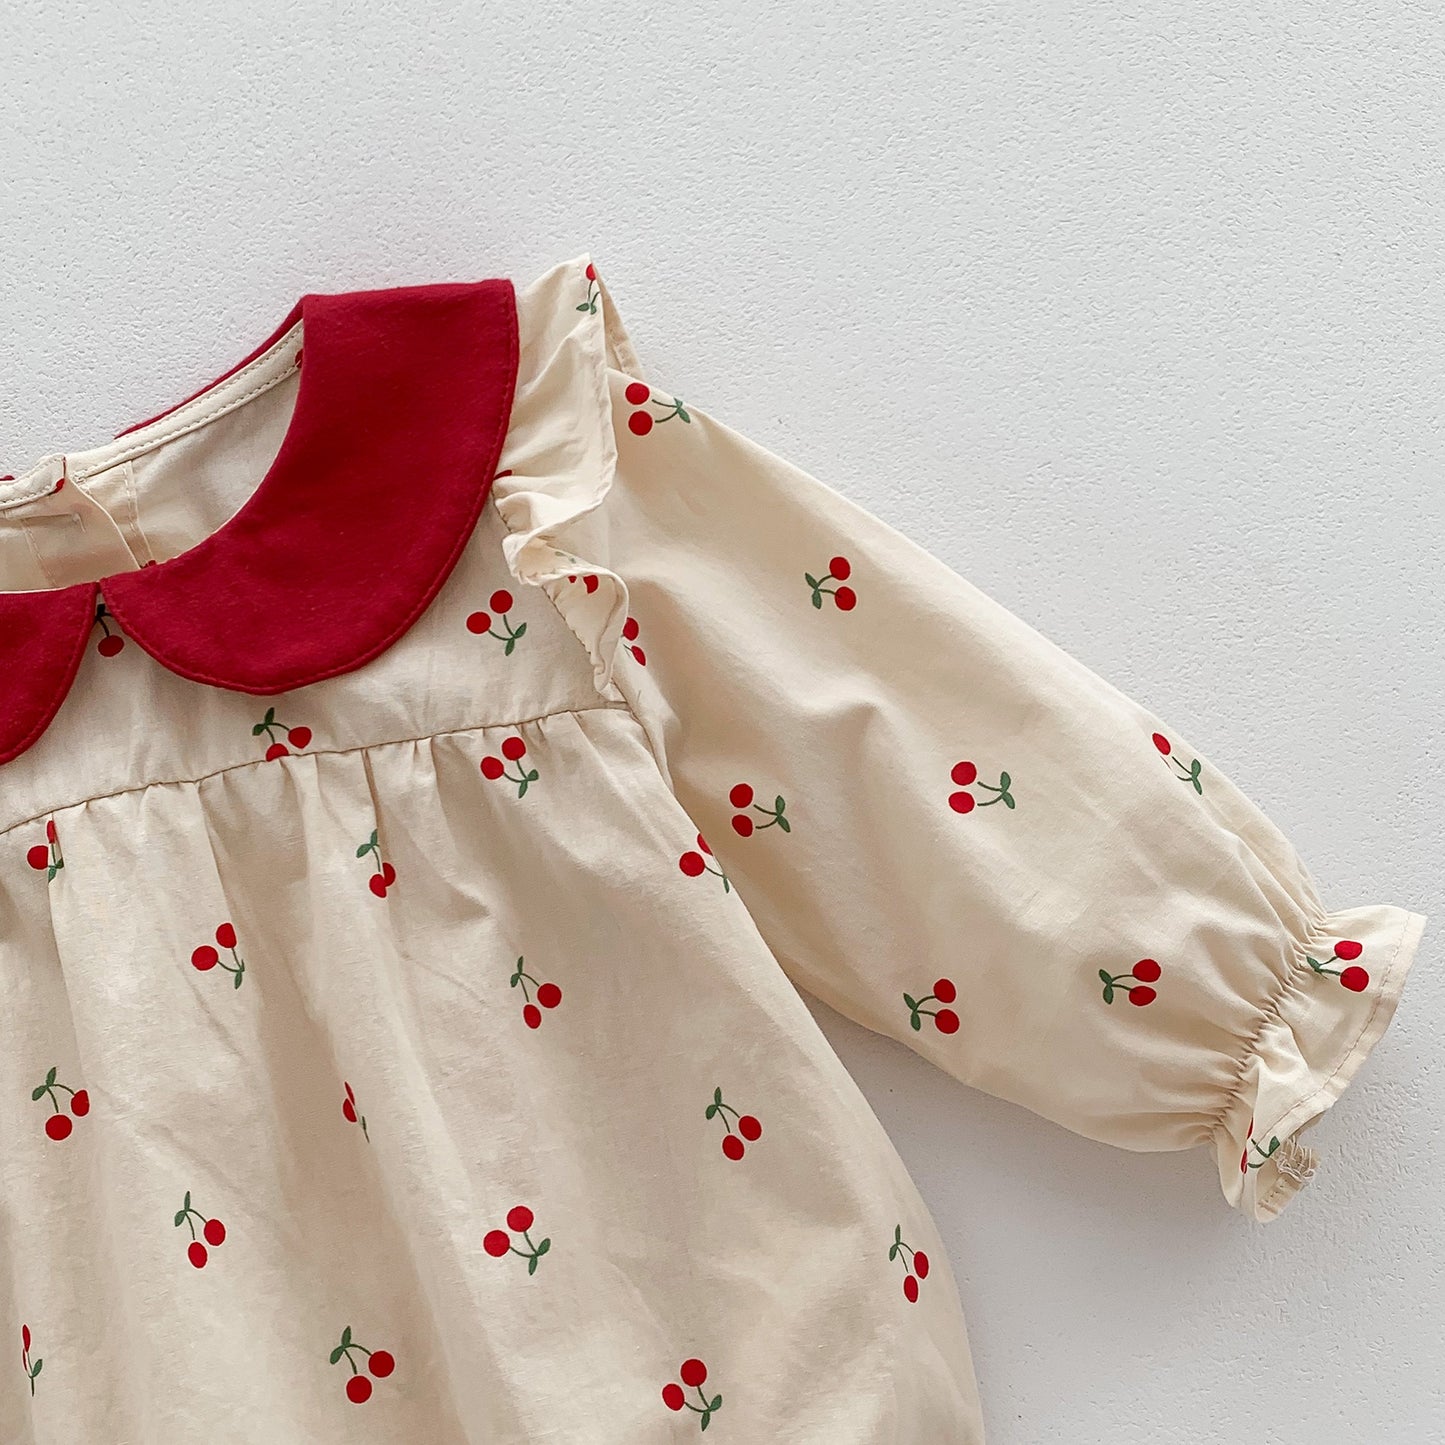 New Arrival Baby Cherry Printing Onesie For Girls With Peter Pan Collar